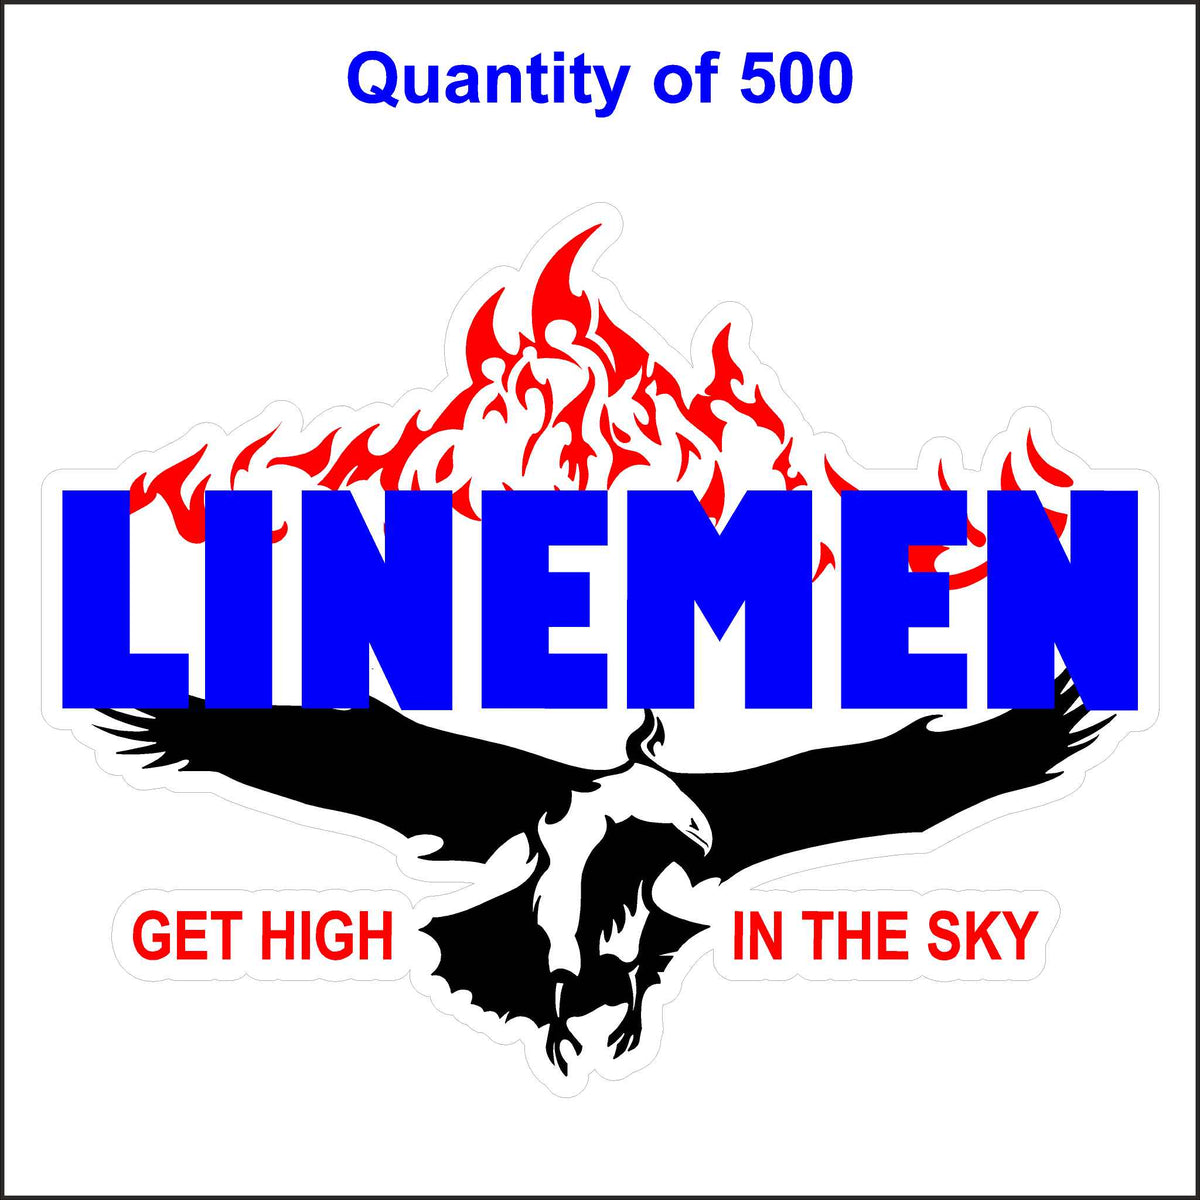 Linemen Get High in the Sky Sticker - Lineman Stickers. 500 Quantity.